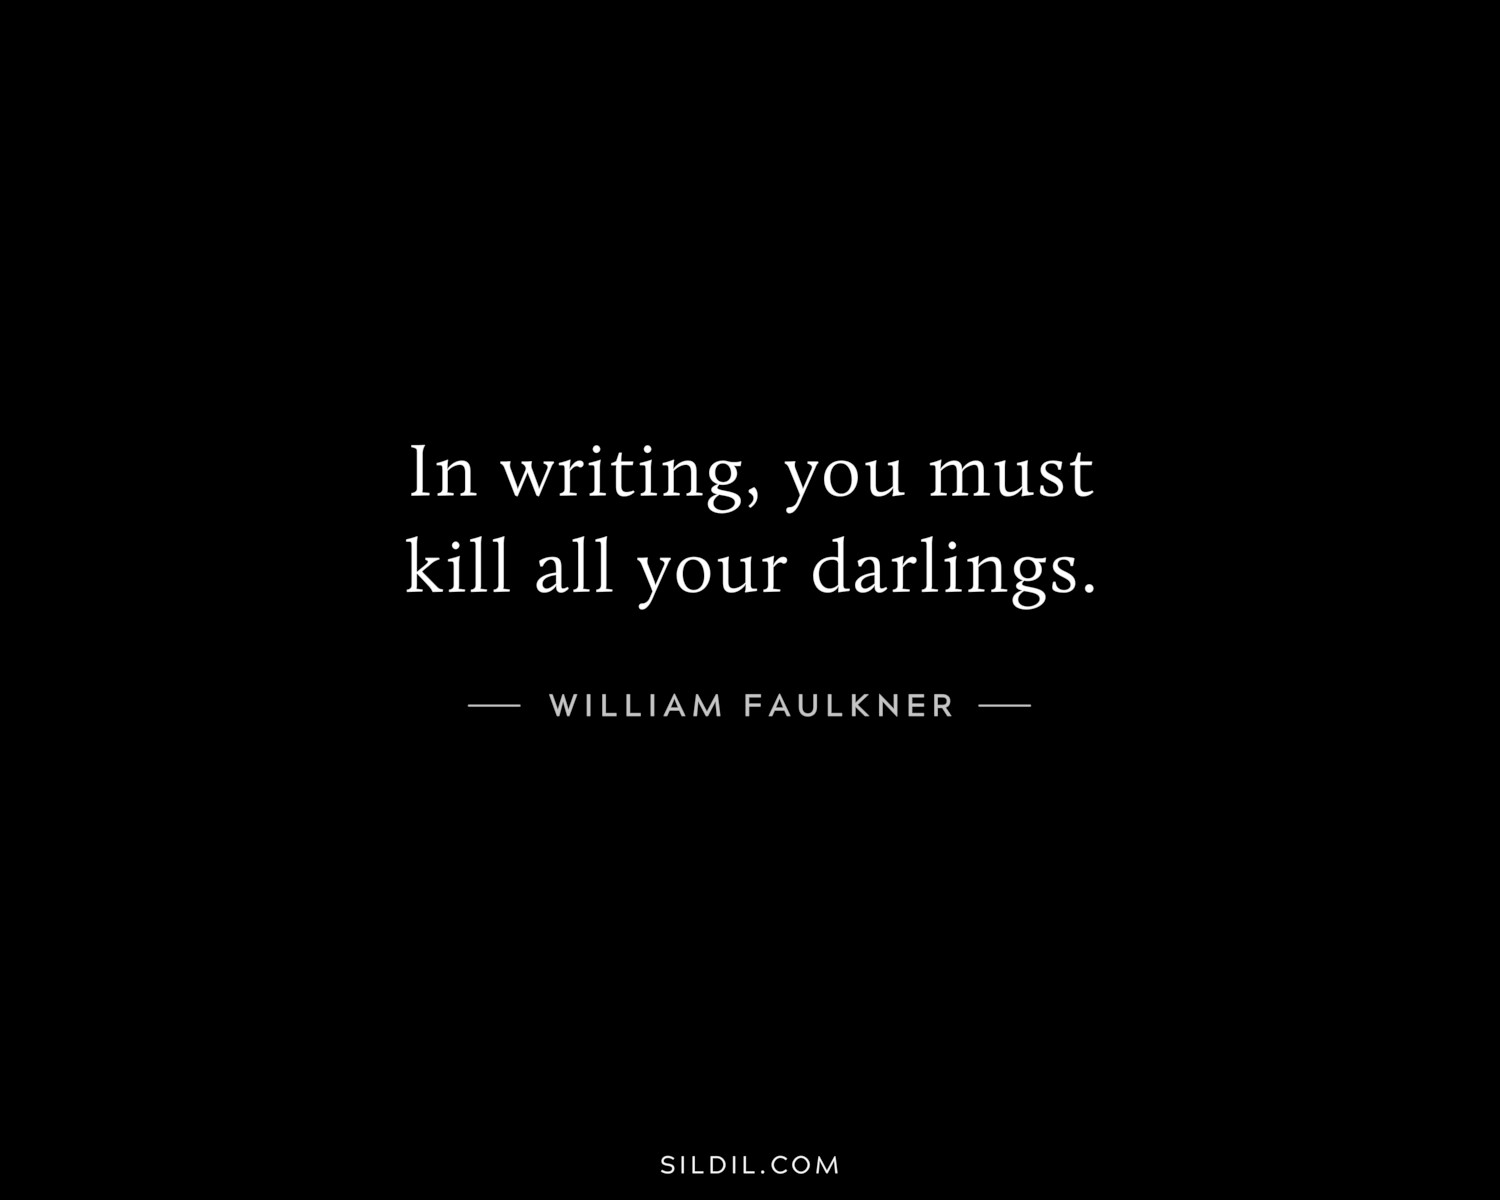 In writing, you must kill all your darlings.